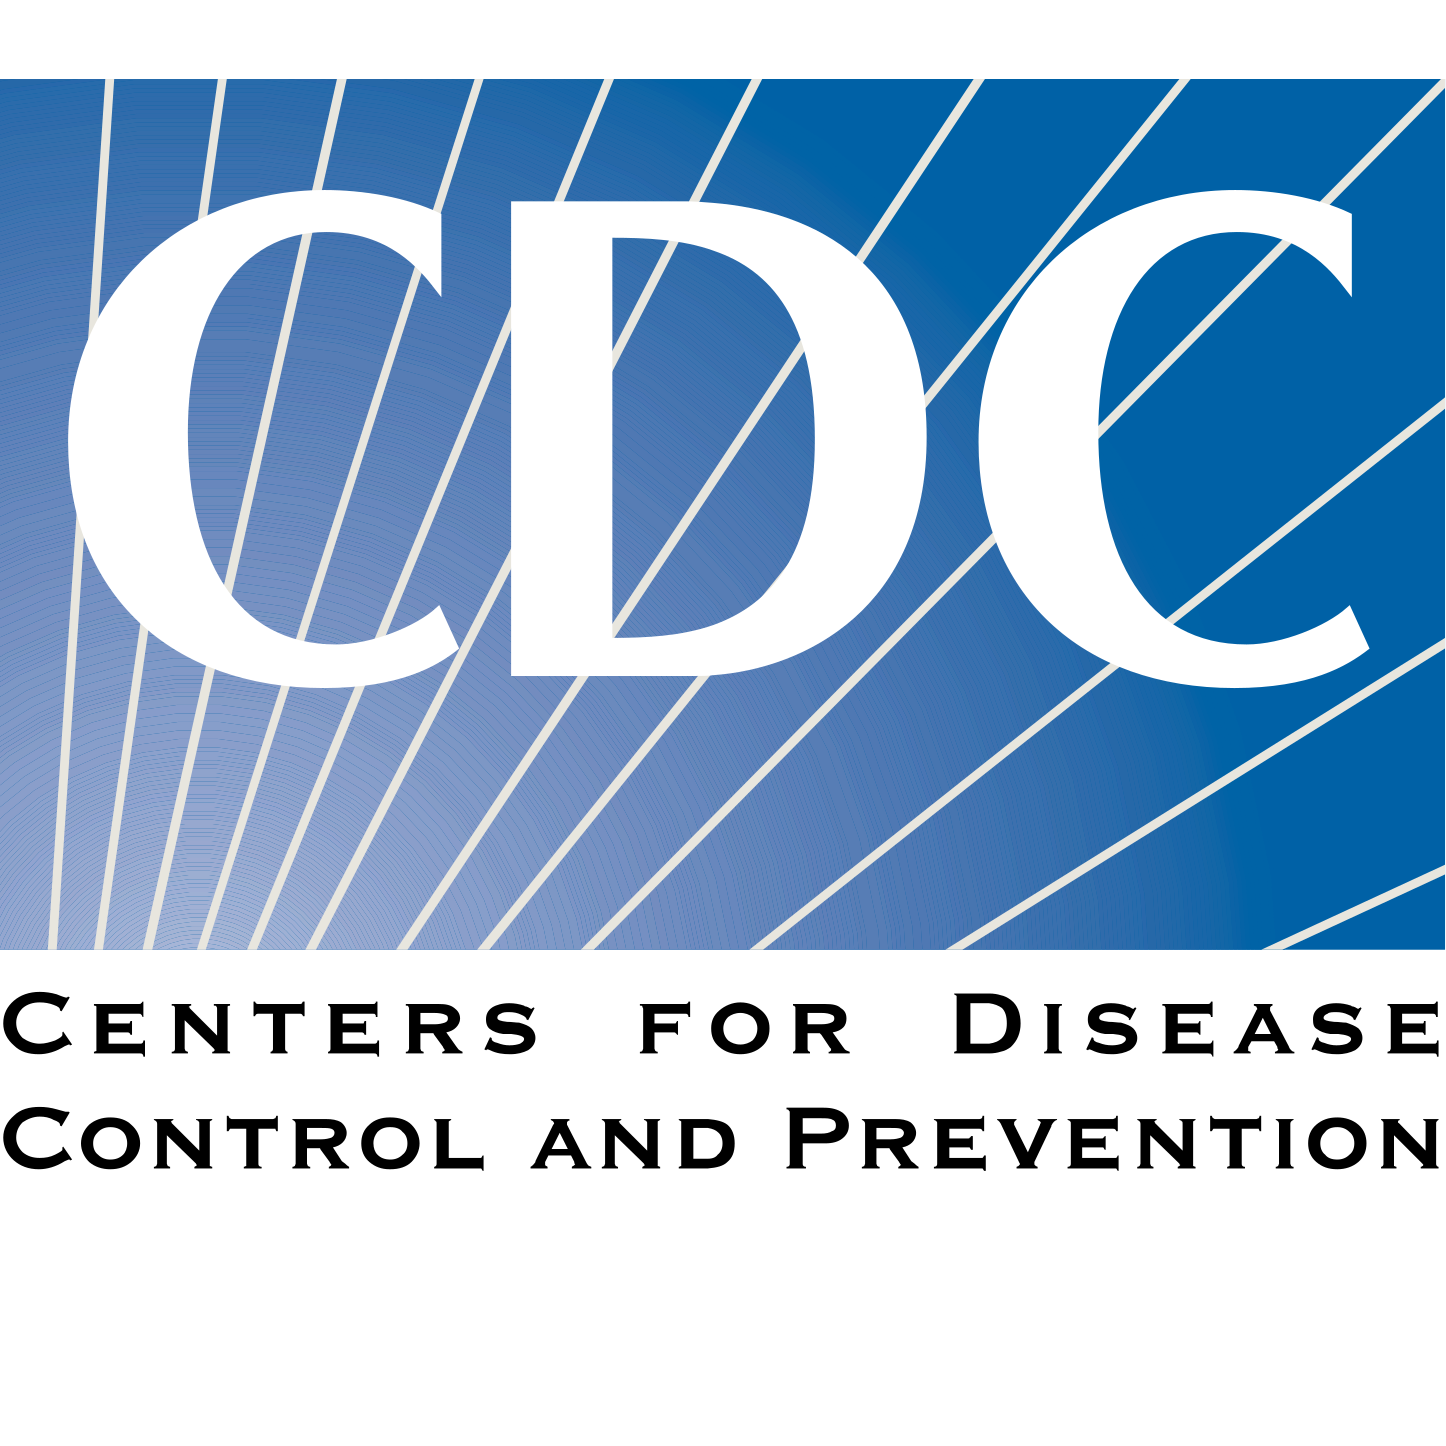 centers for disease control and prevention (cdc) | drought.gov